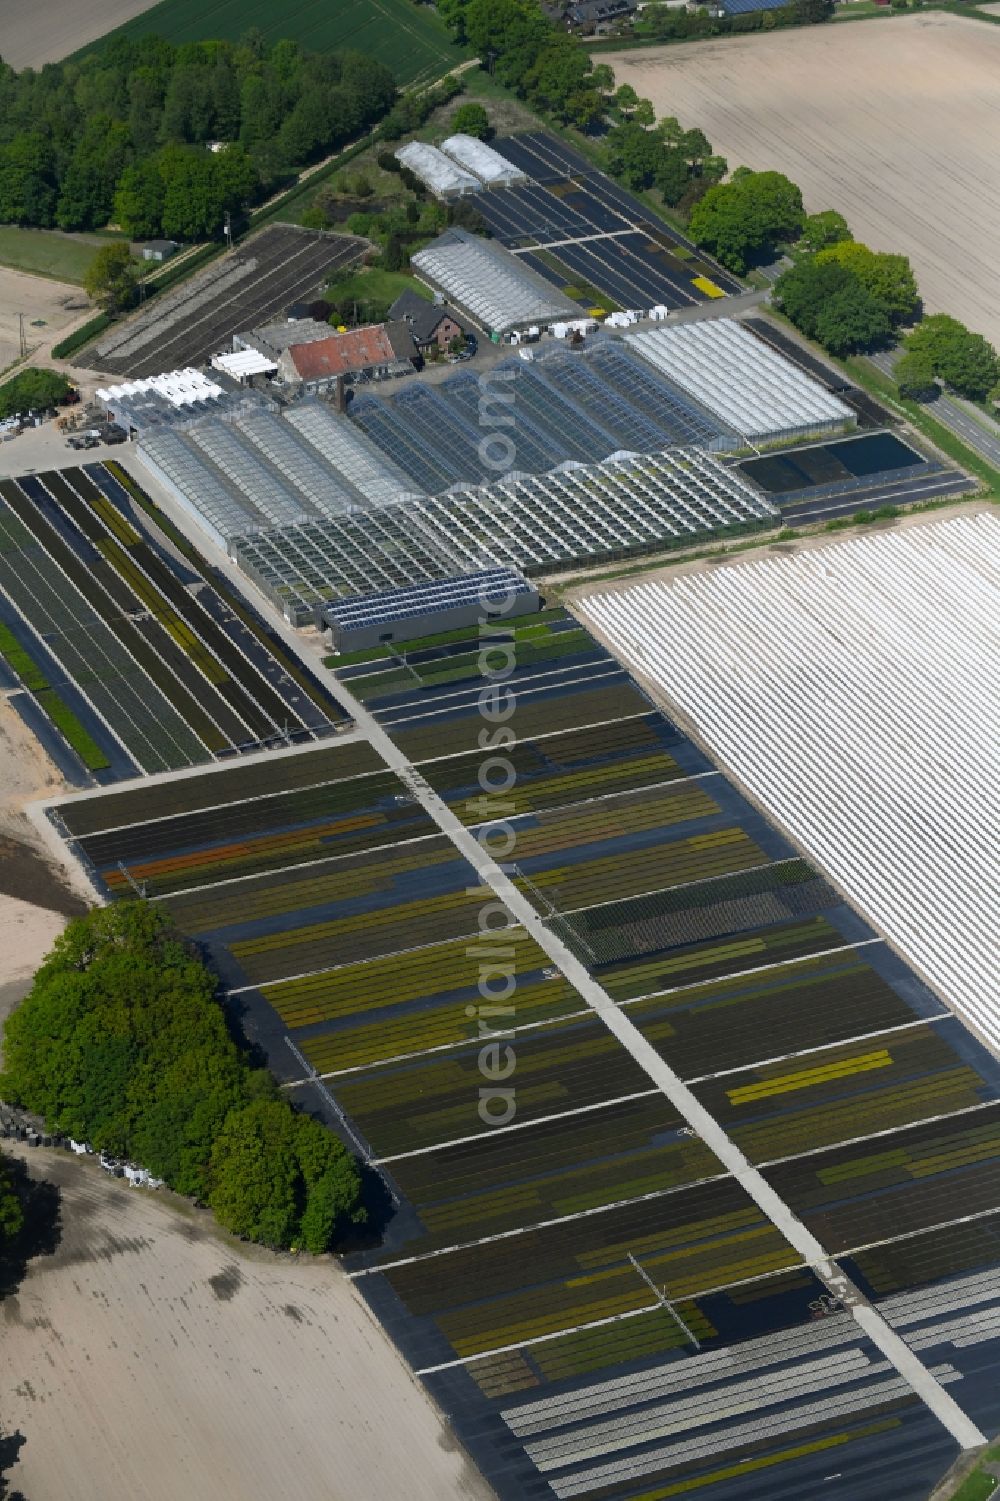 Aerial image Kevelaer - Glass roof surfaces in the greenhouse rows for Floriculture in Kevelaer in the state North Rhine-Westphalia, Germany